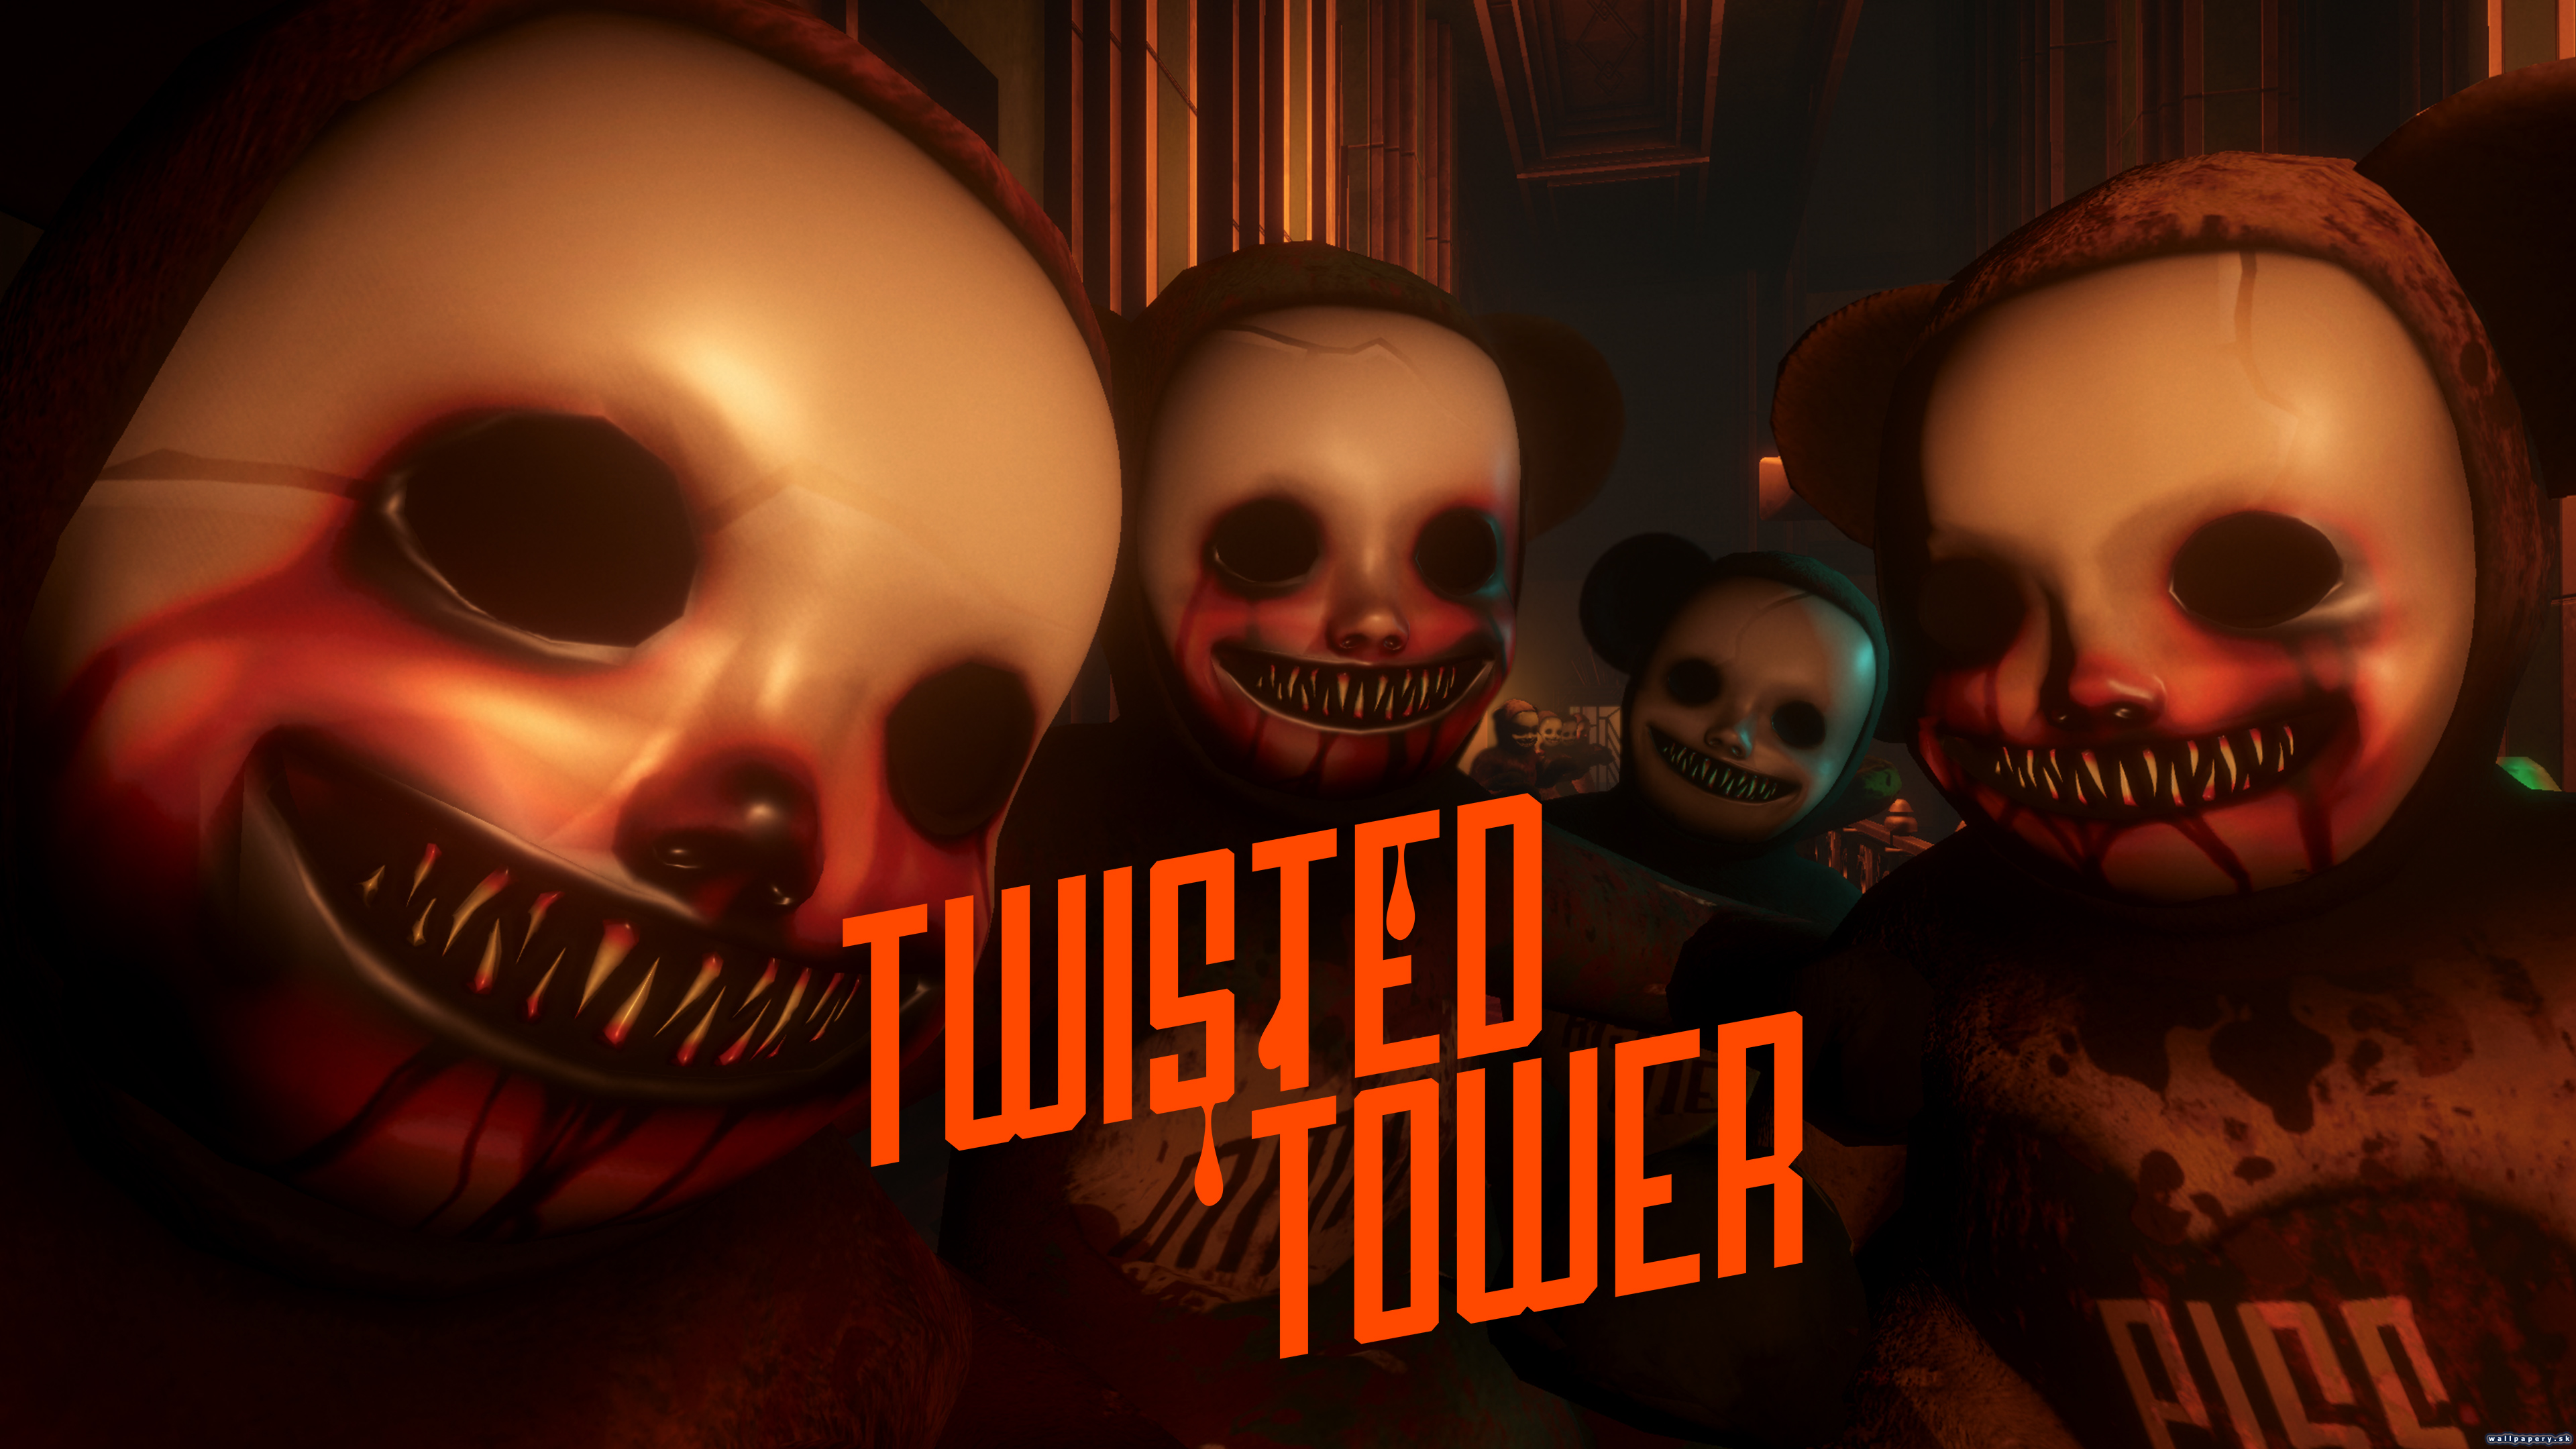 Twisted Tower - wallpaper 1